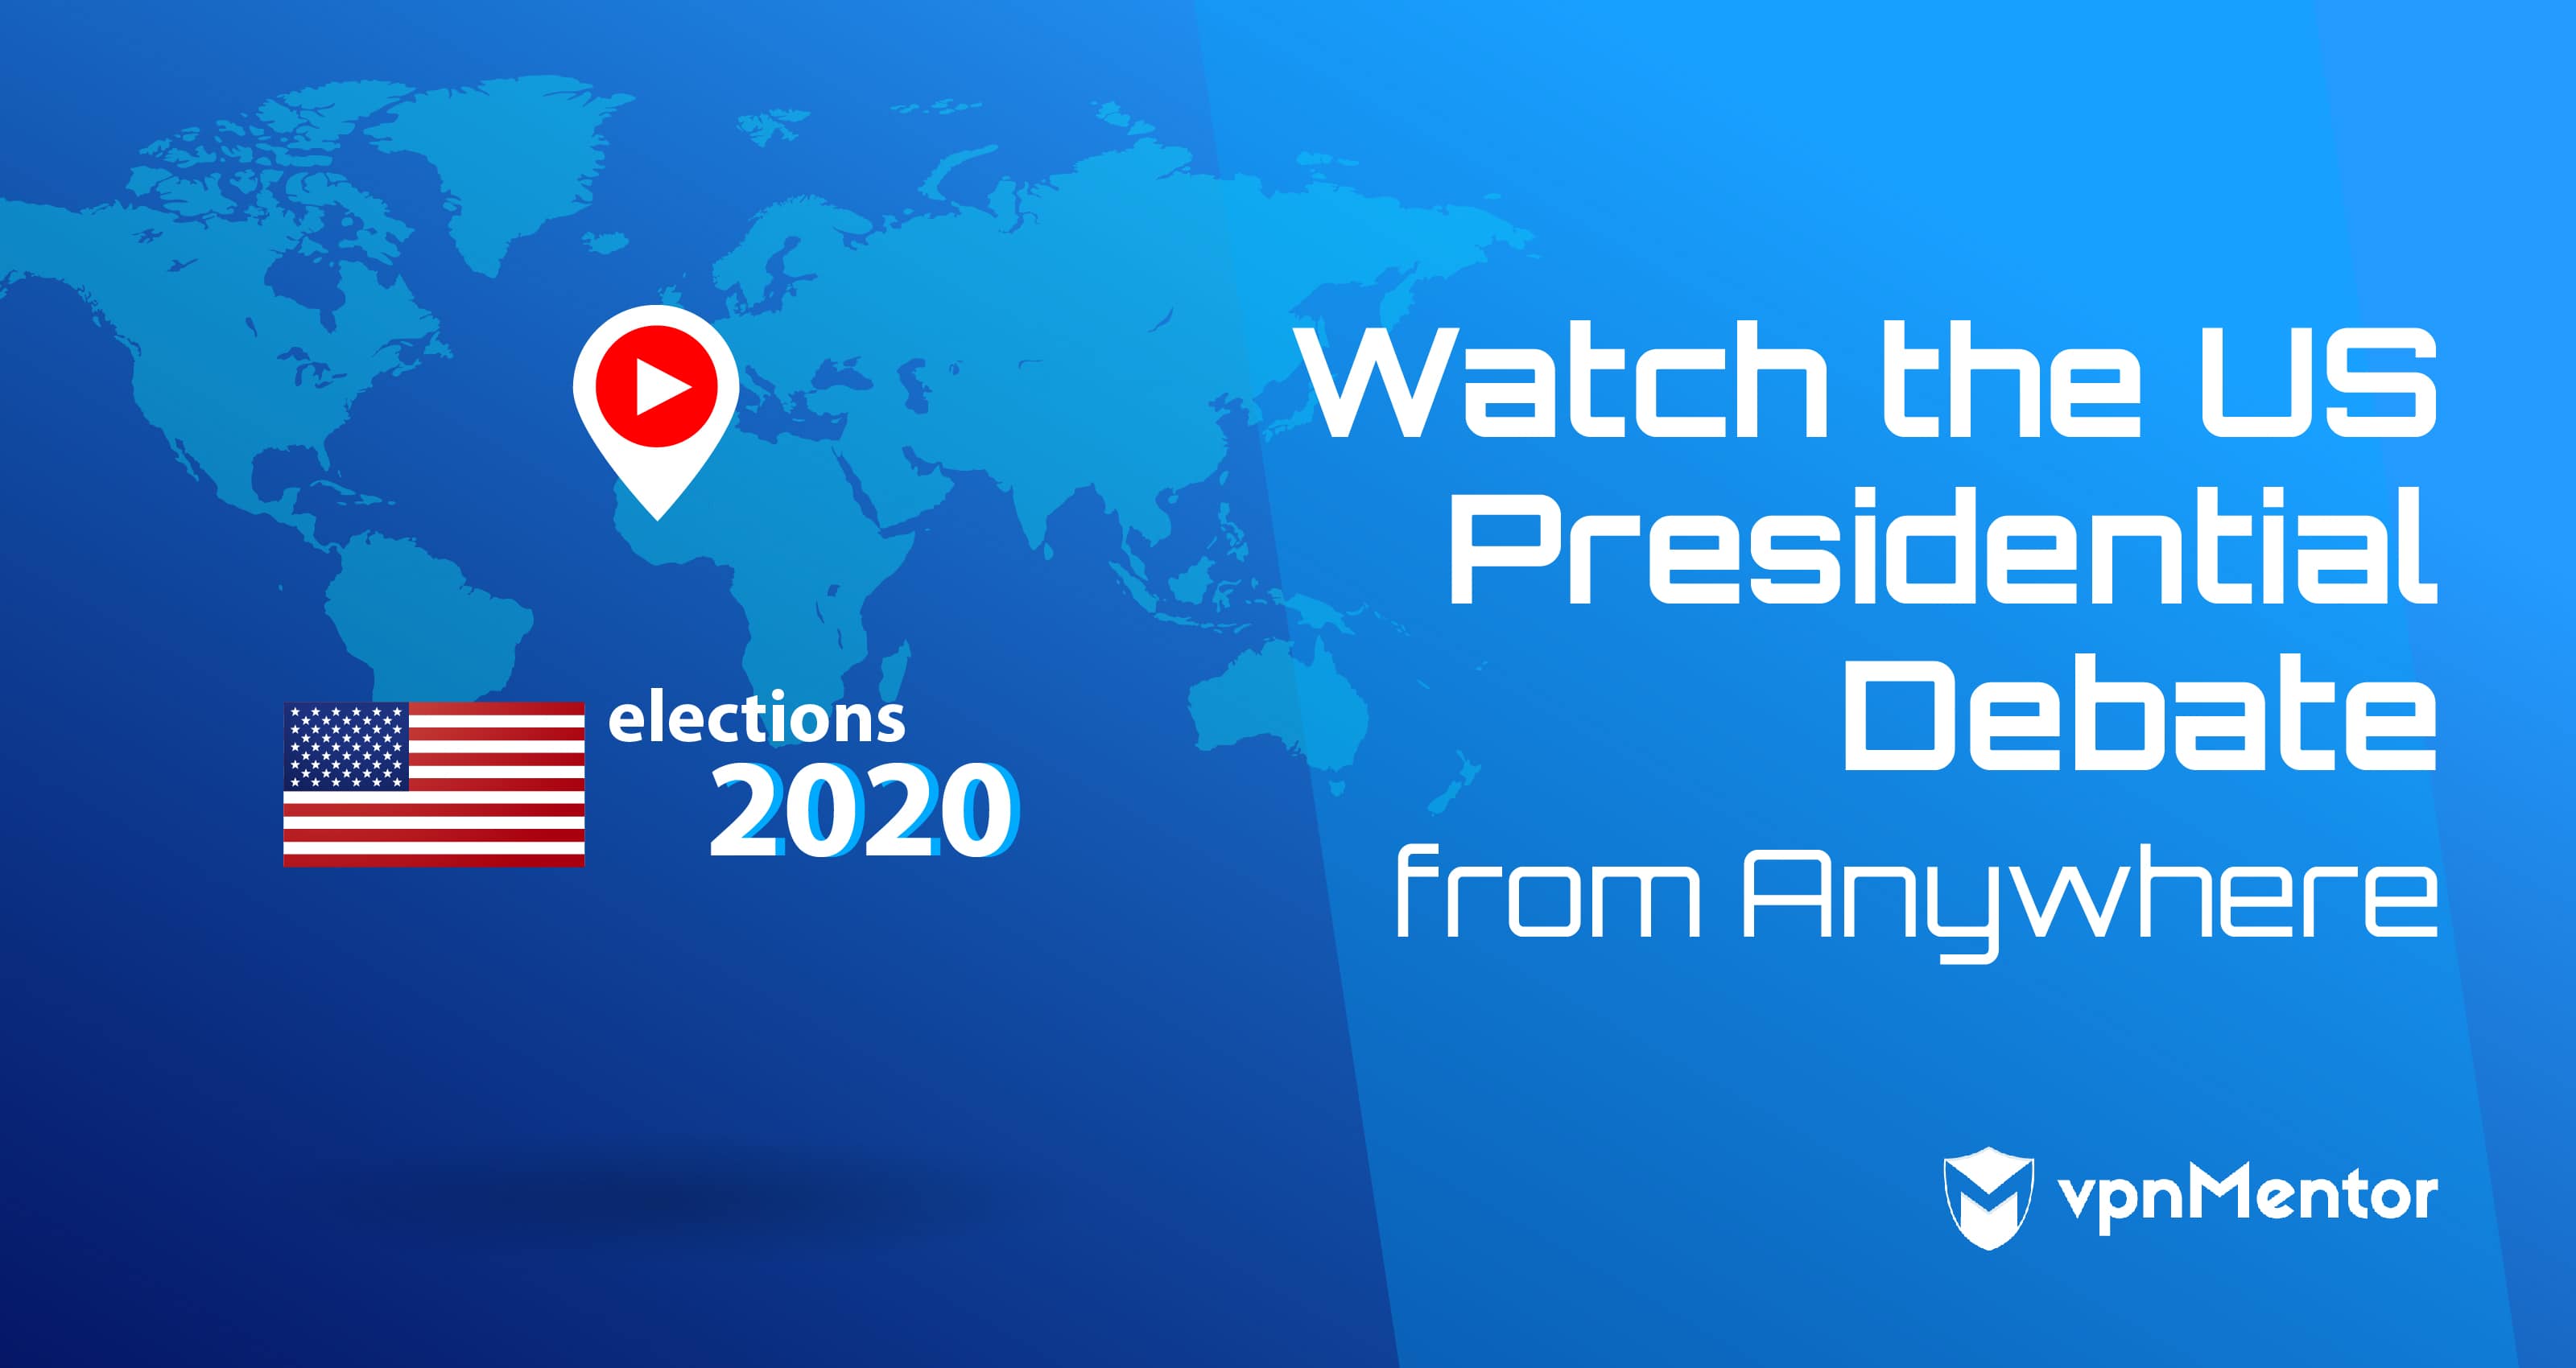 Watch the US Presidential Debate from Anywhere in 2020!